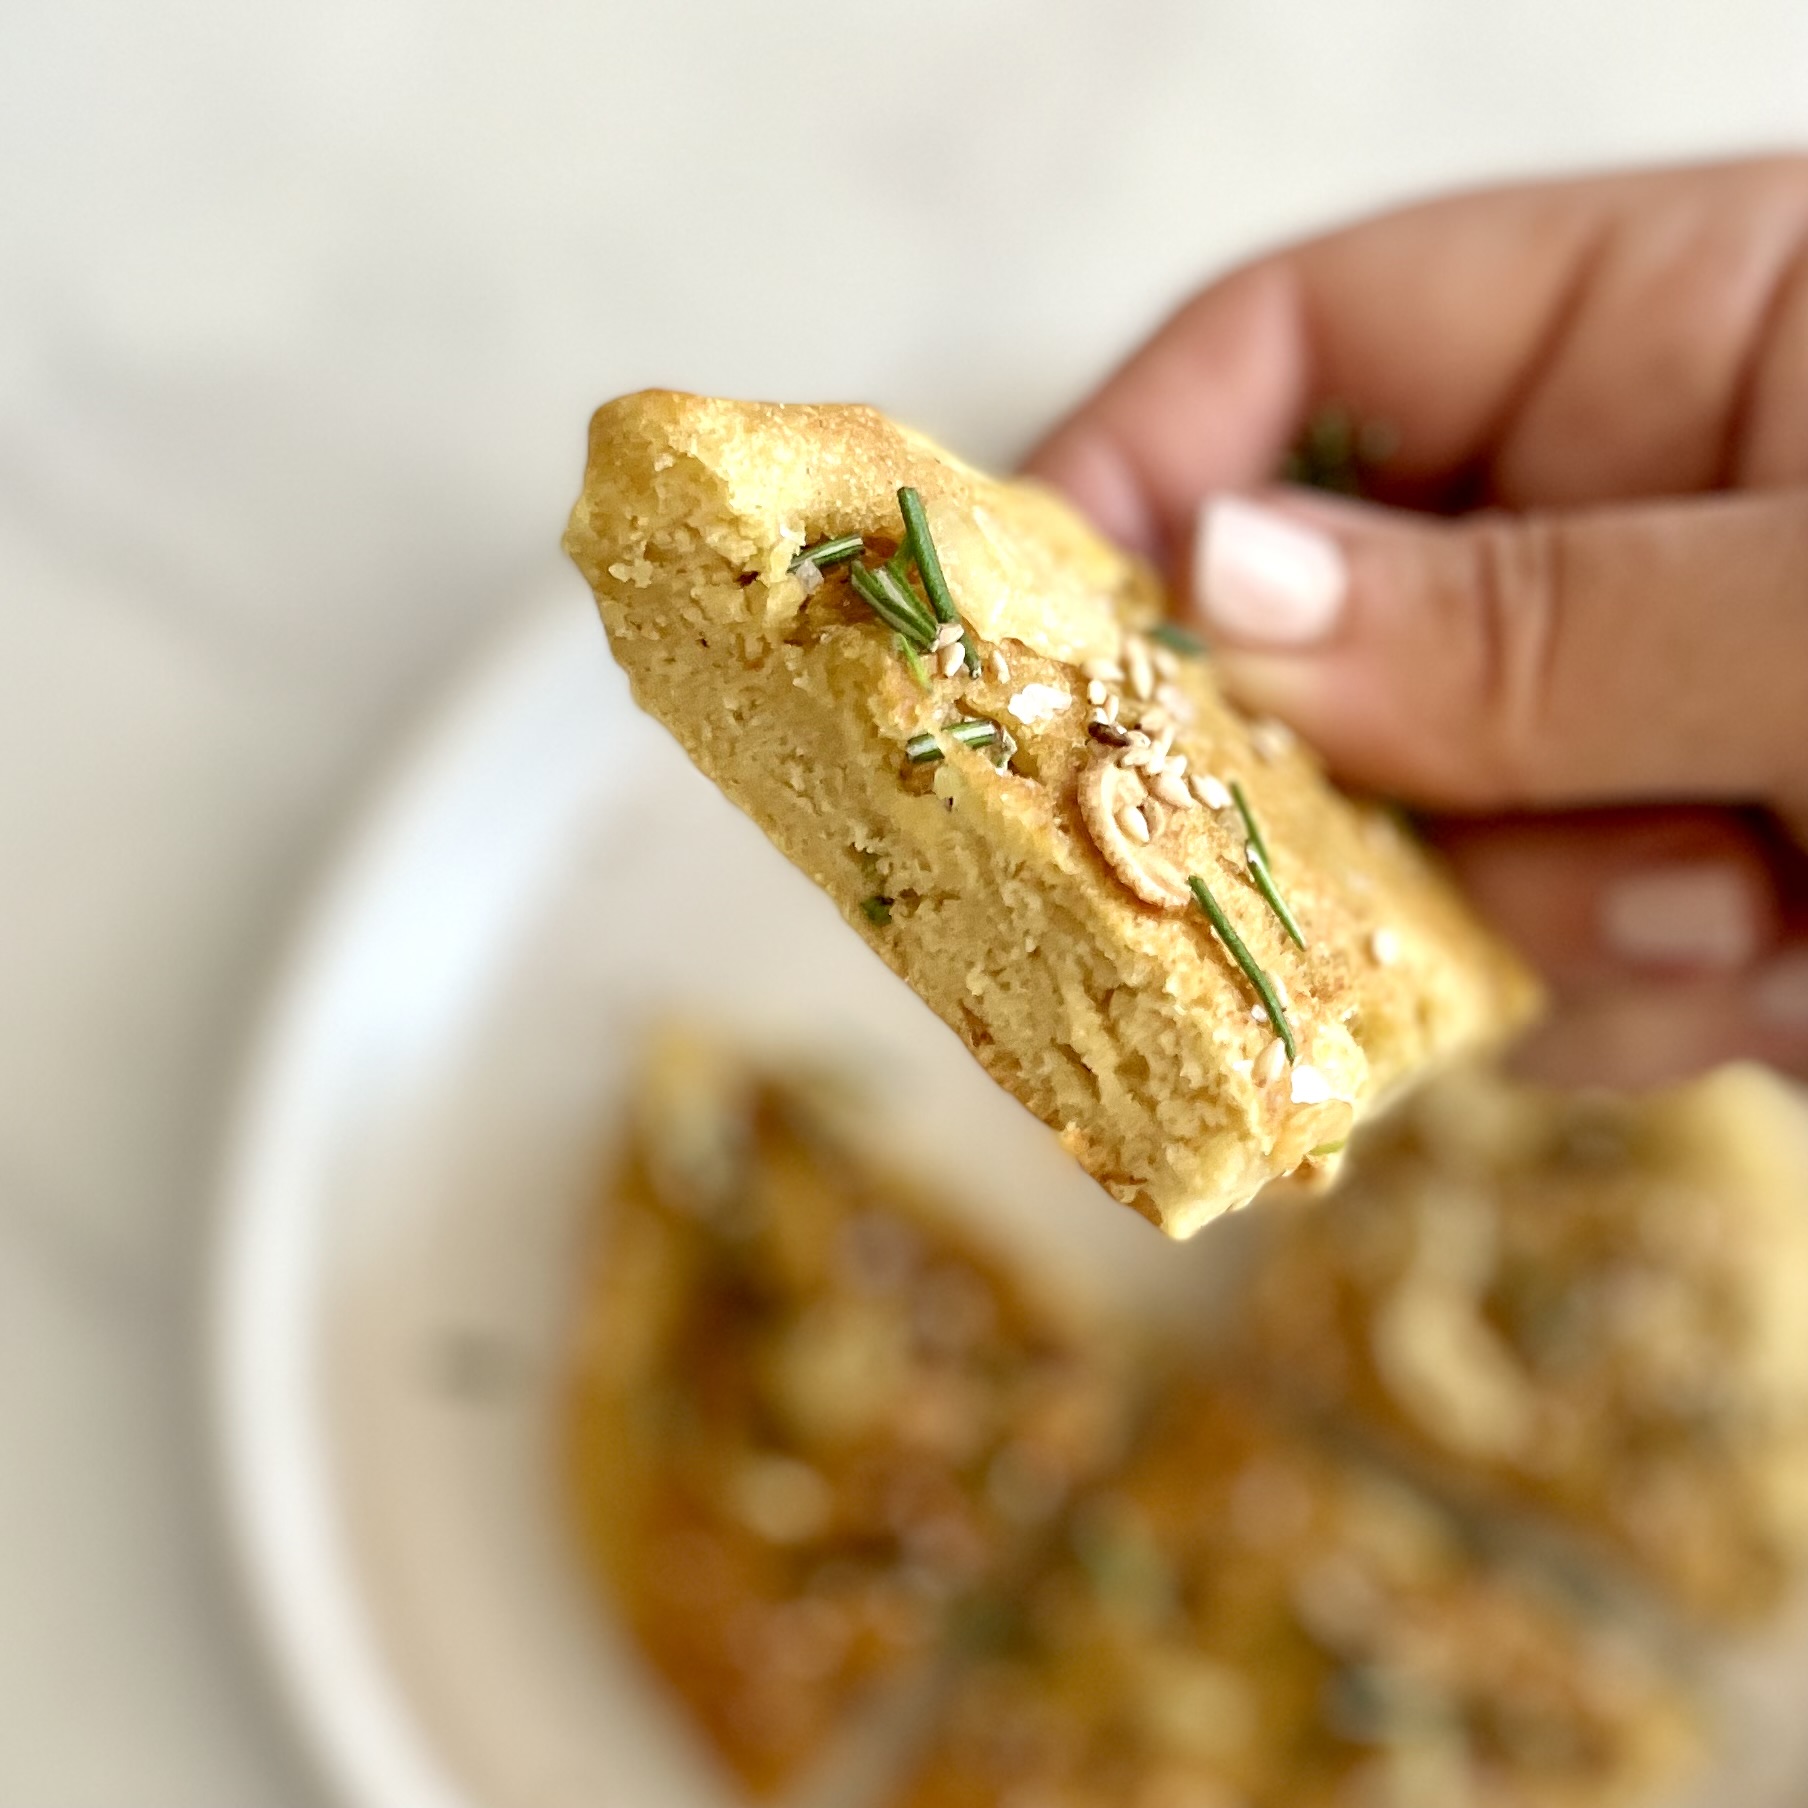 holding a wedge of focaccia-style skillet chickpea flatbread